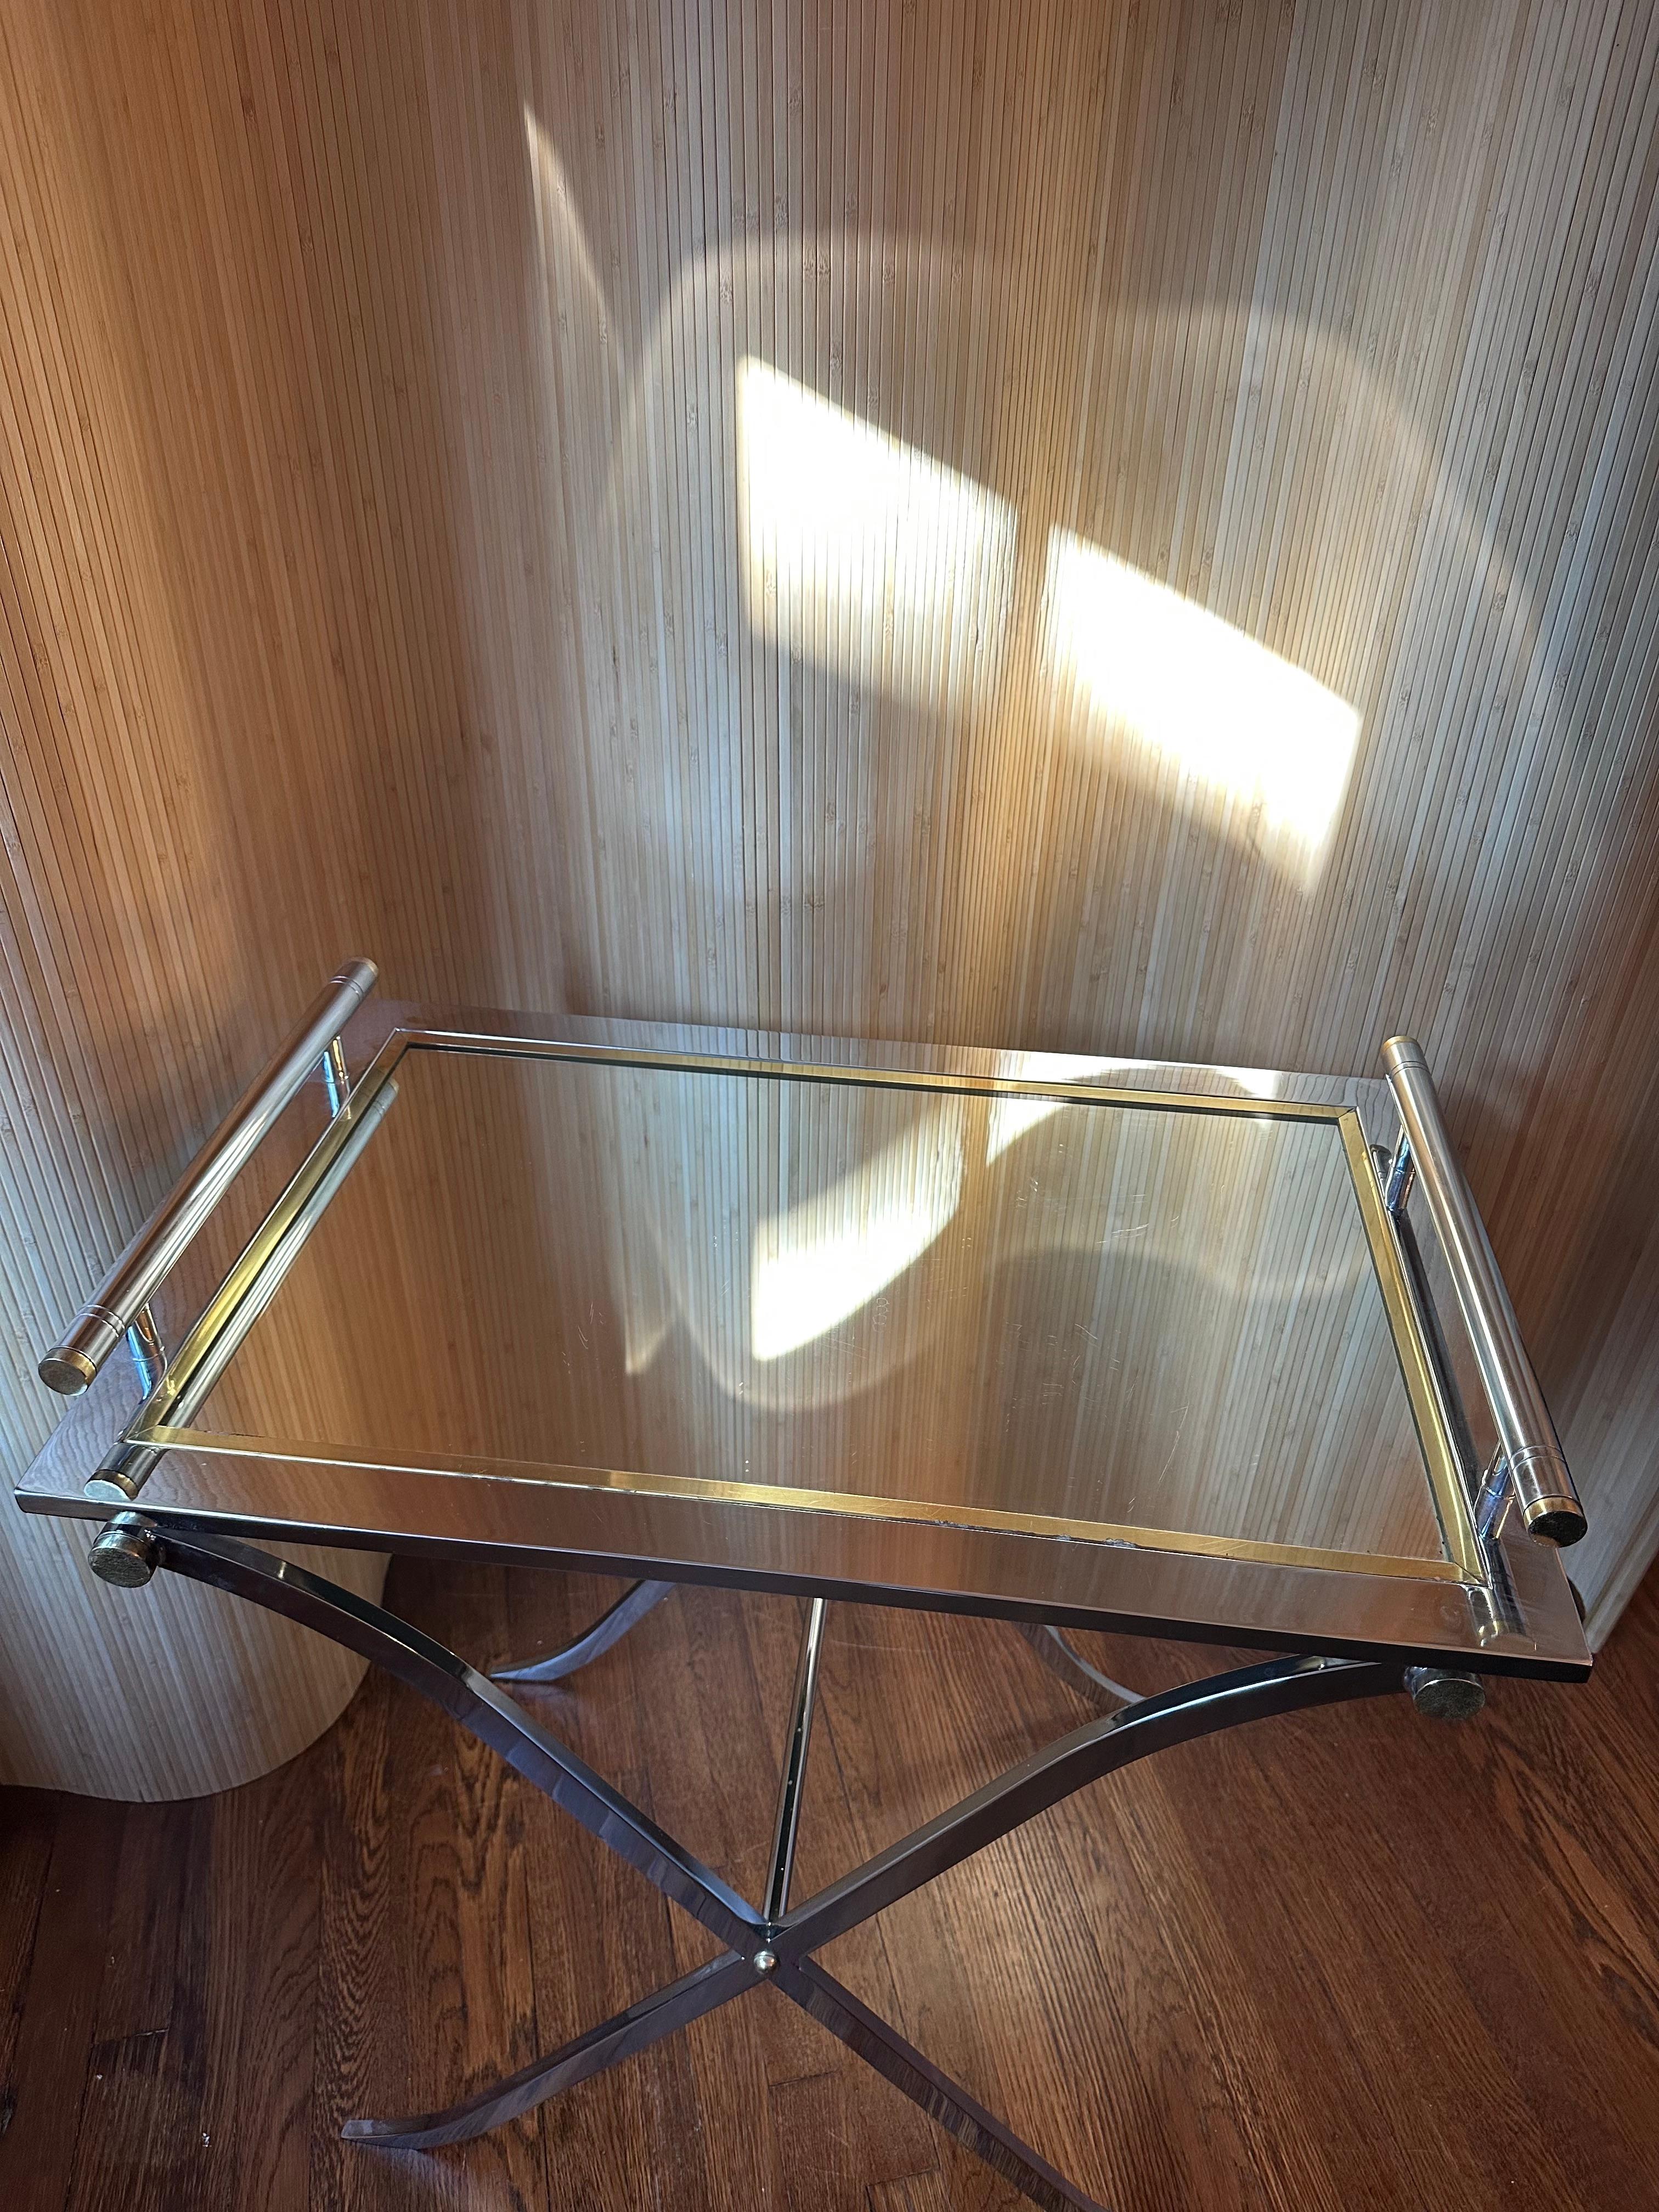 Step into the glamour of yesteryear with this vintage mirrored glass and brass tray table from the esteemed Design Institute of America. Crafted with precision and adorned in timeless brass, its reflective surface captures the essence of